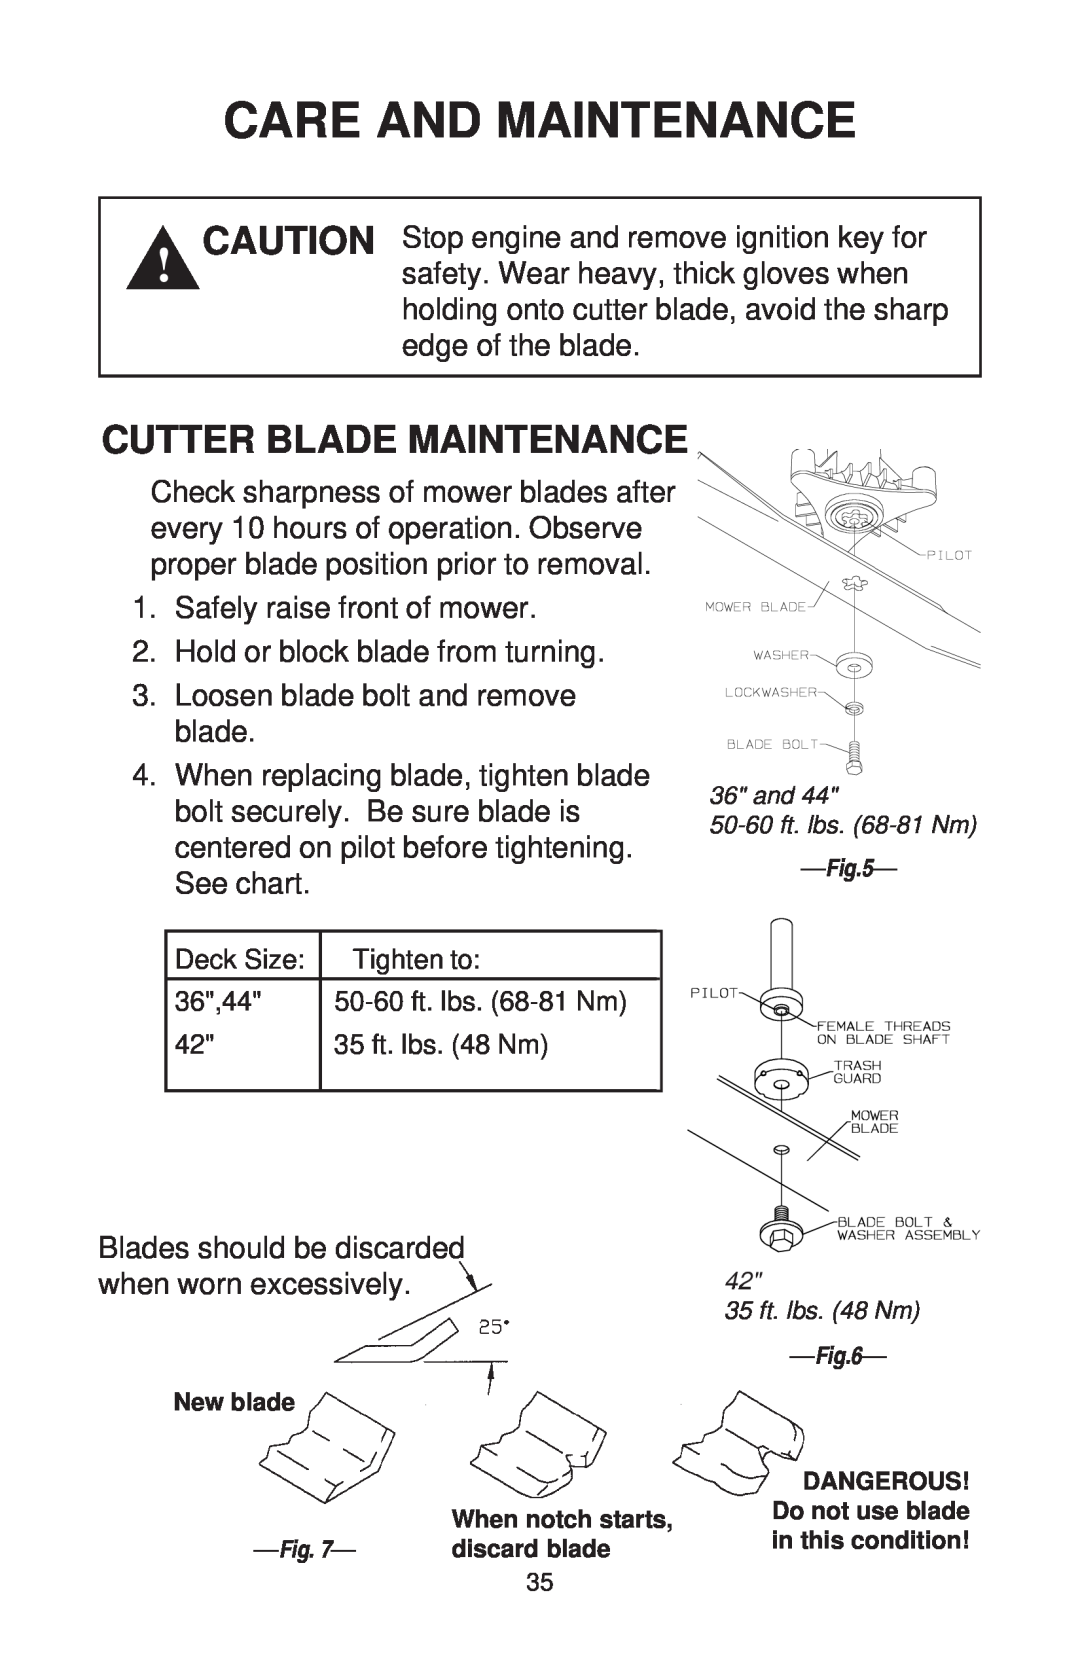 Dixon ZTR 44/968999538 Cutter Blade Maintenance, Care And Maintenance, Blades should be discarded, when worn excessively 